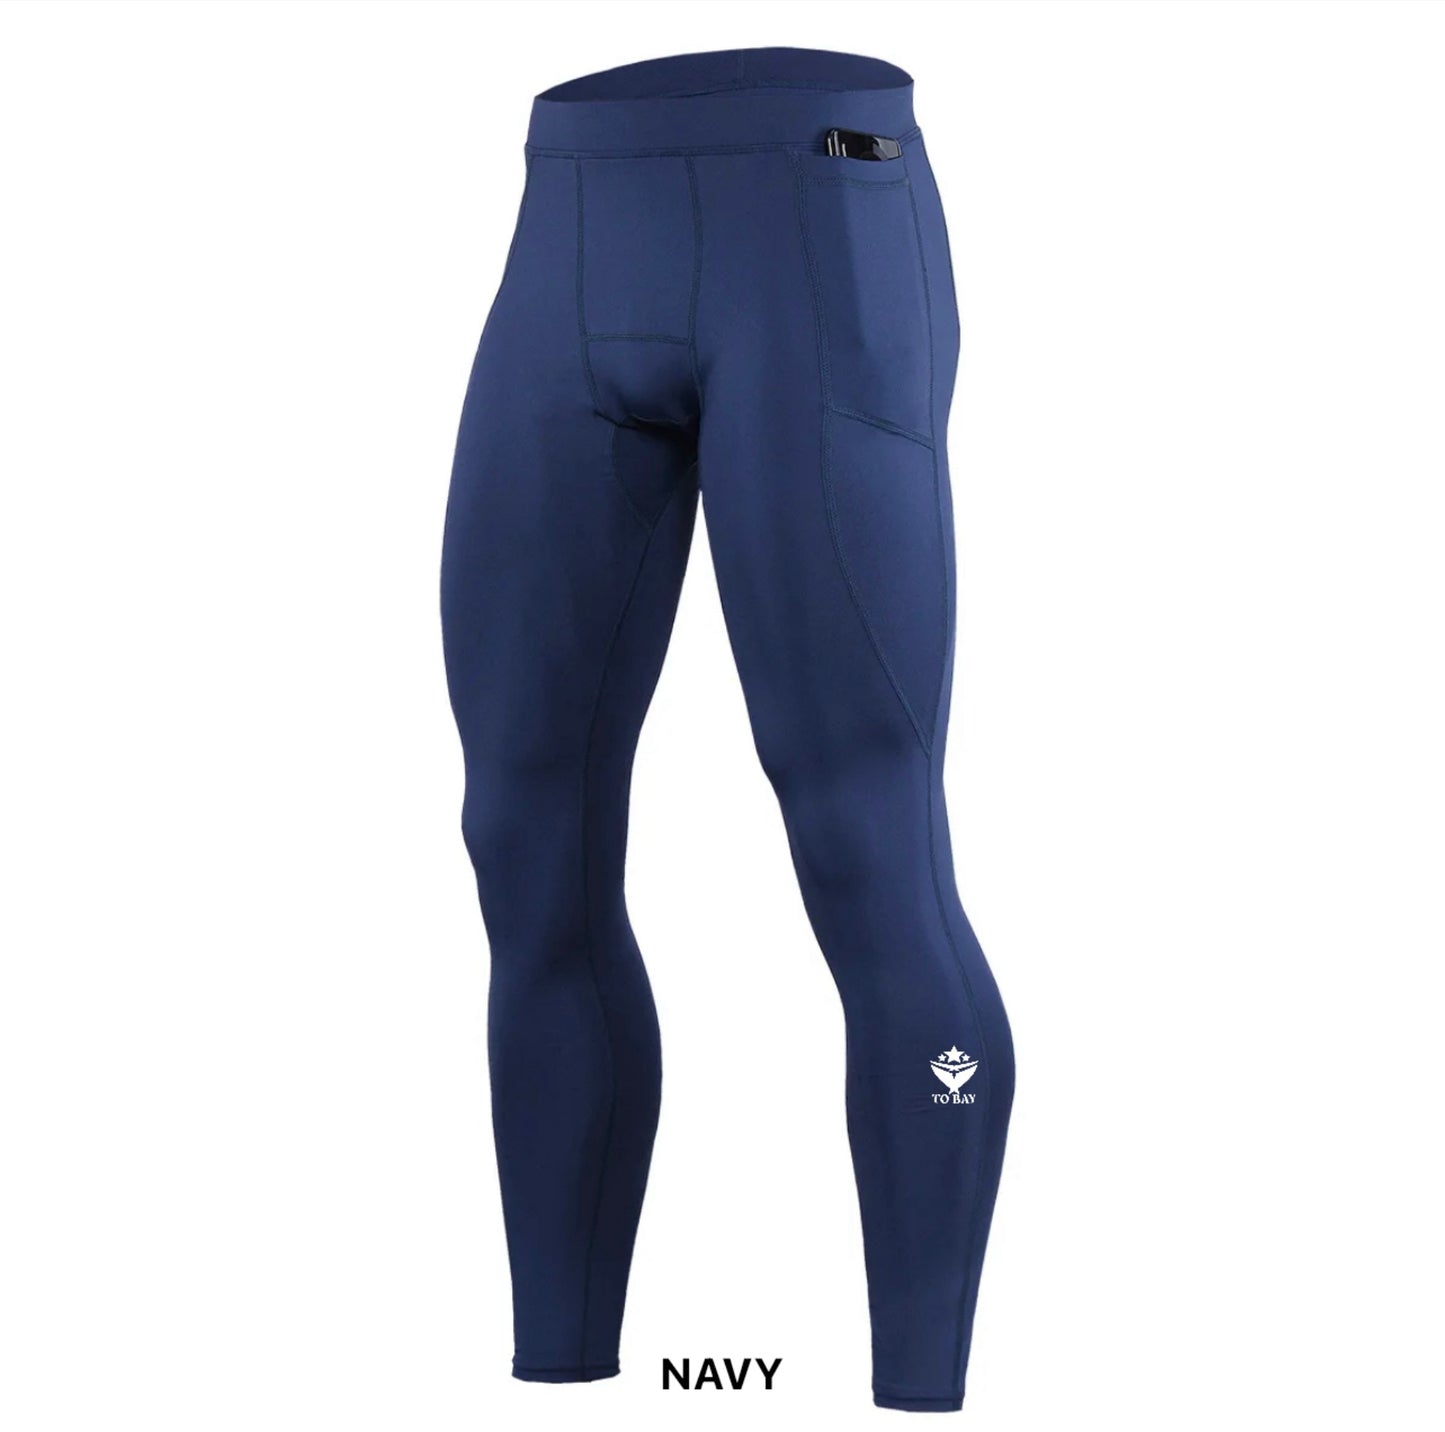 TO BAY Pro Compression Tights